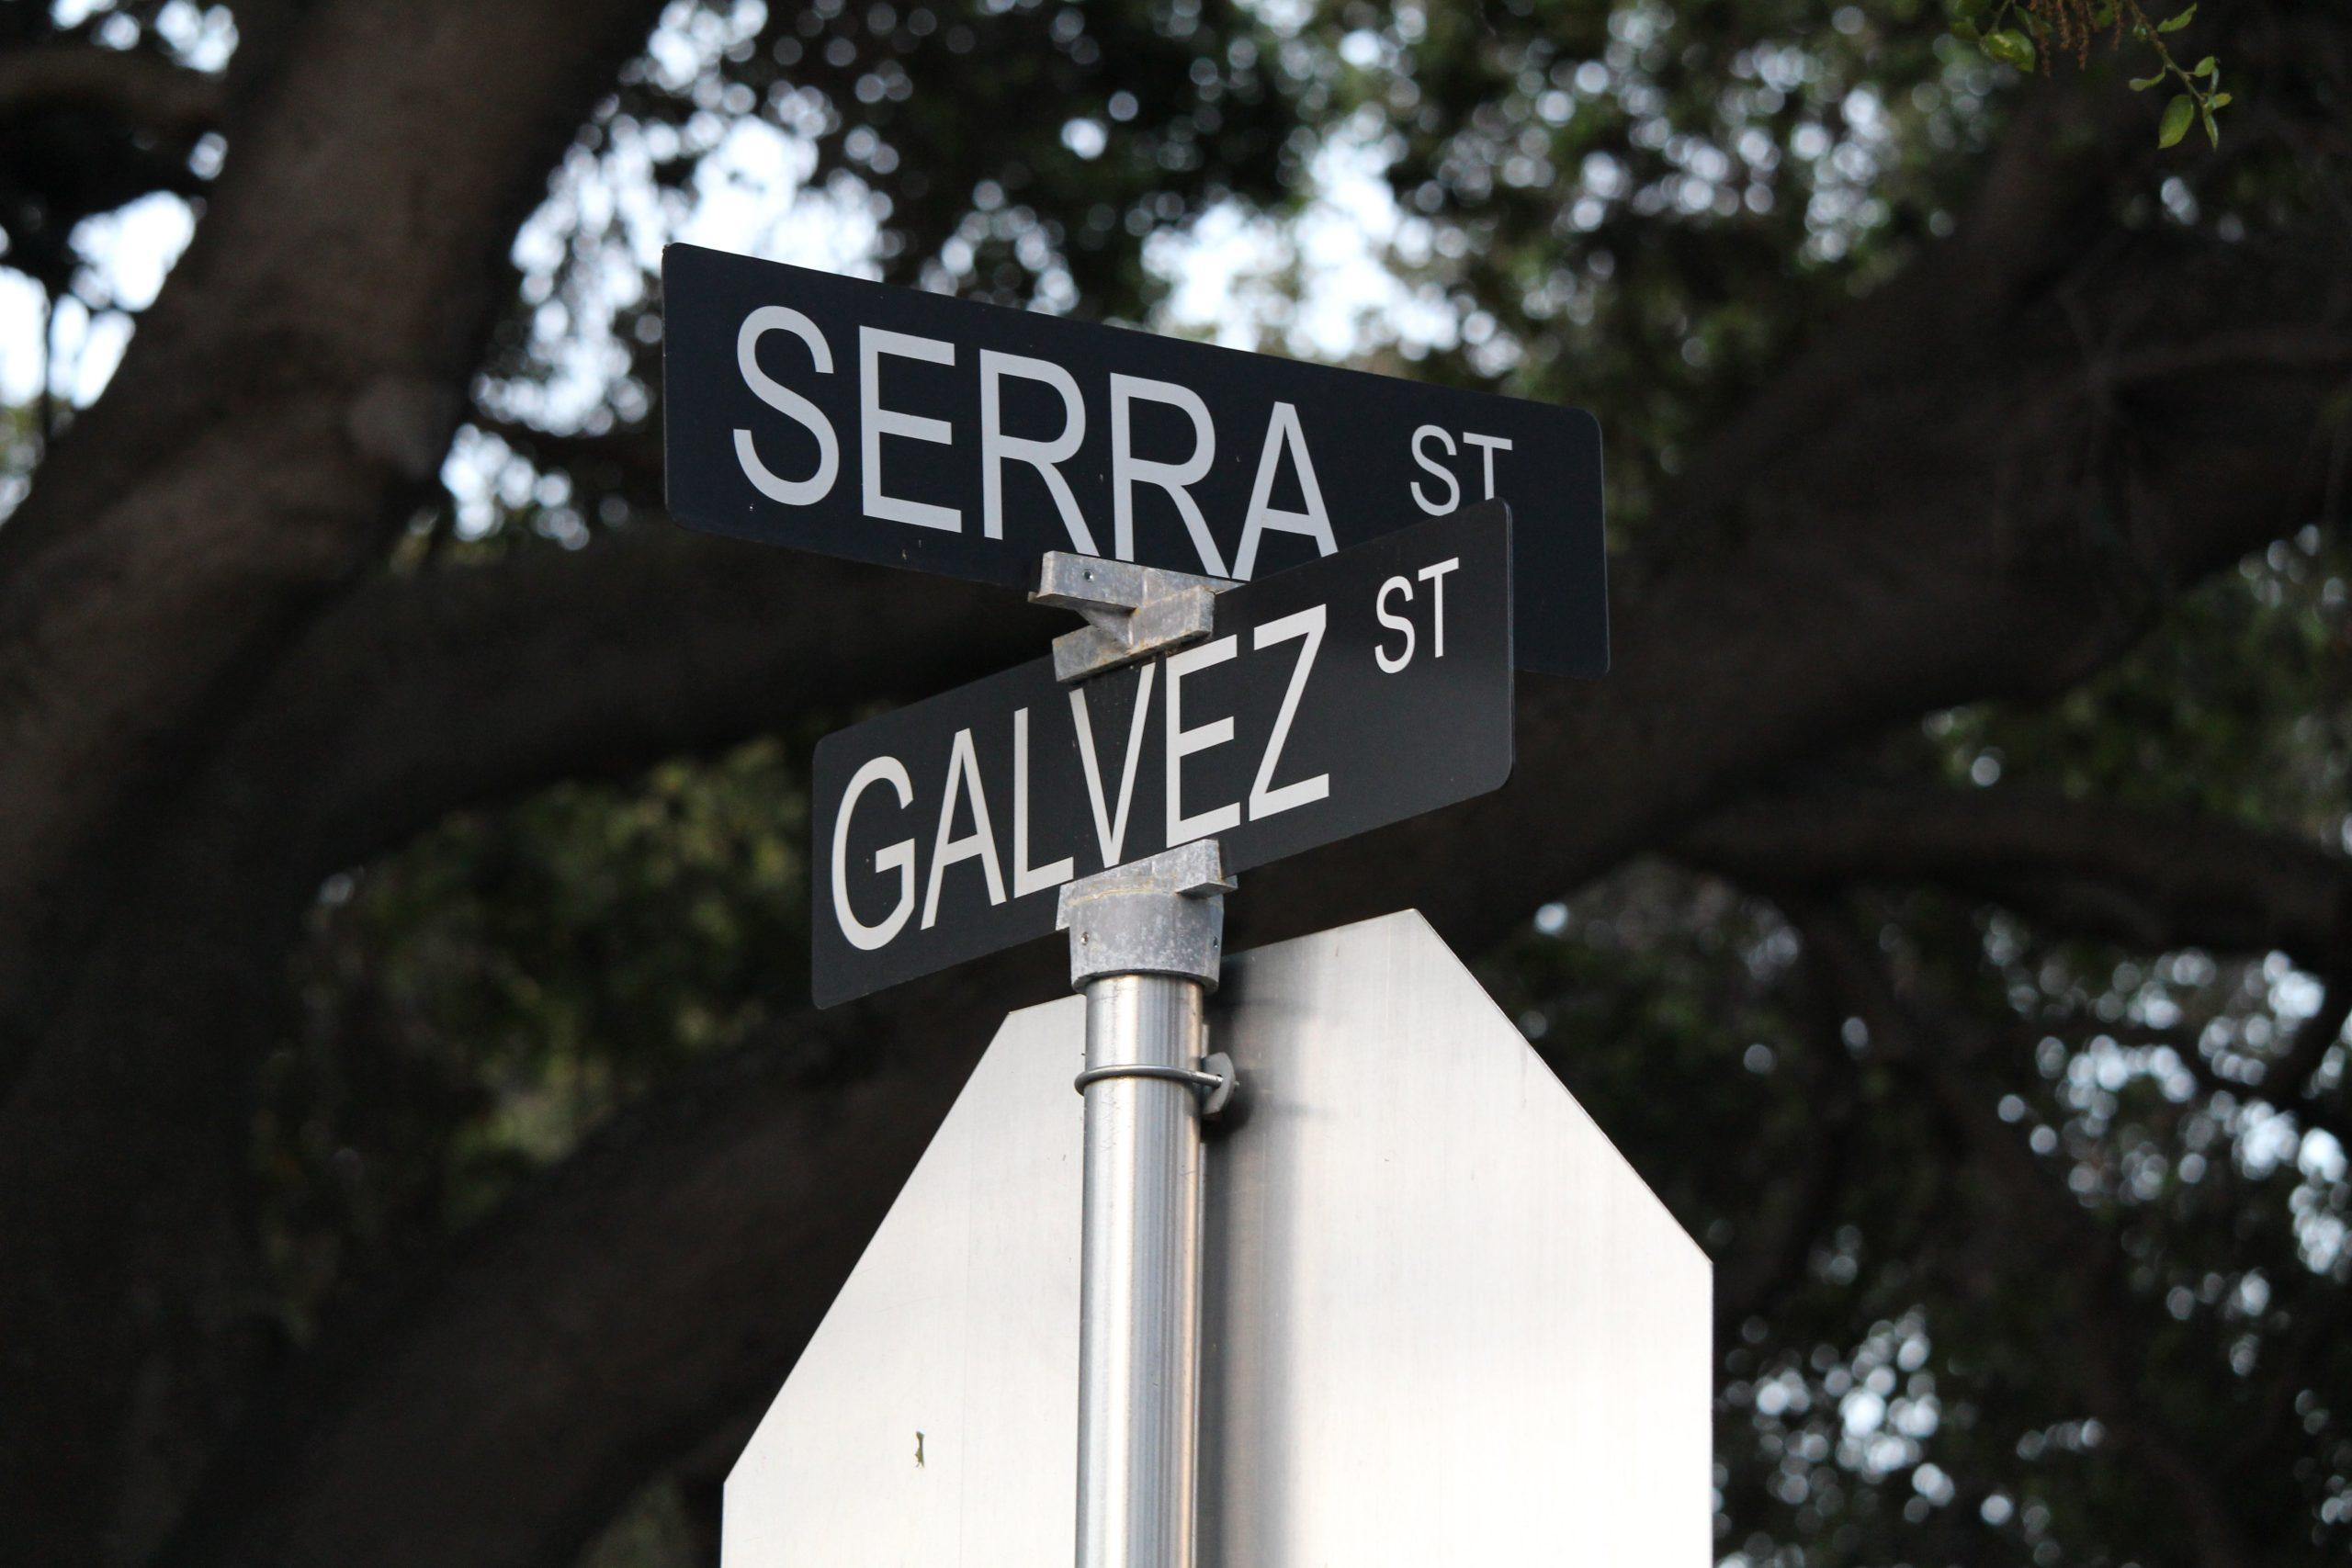 Serra Street is one of many examples of Junipero Serra’s legacy on Stanford campus.